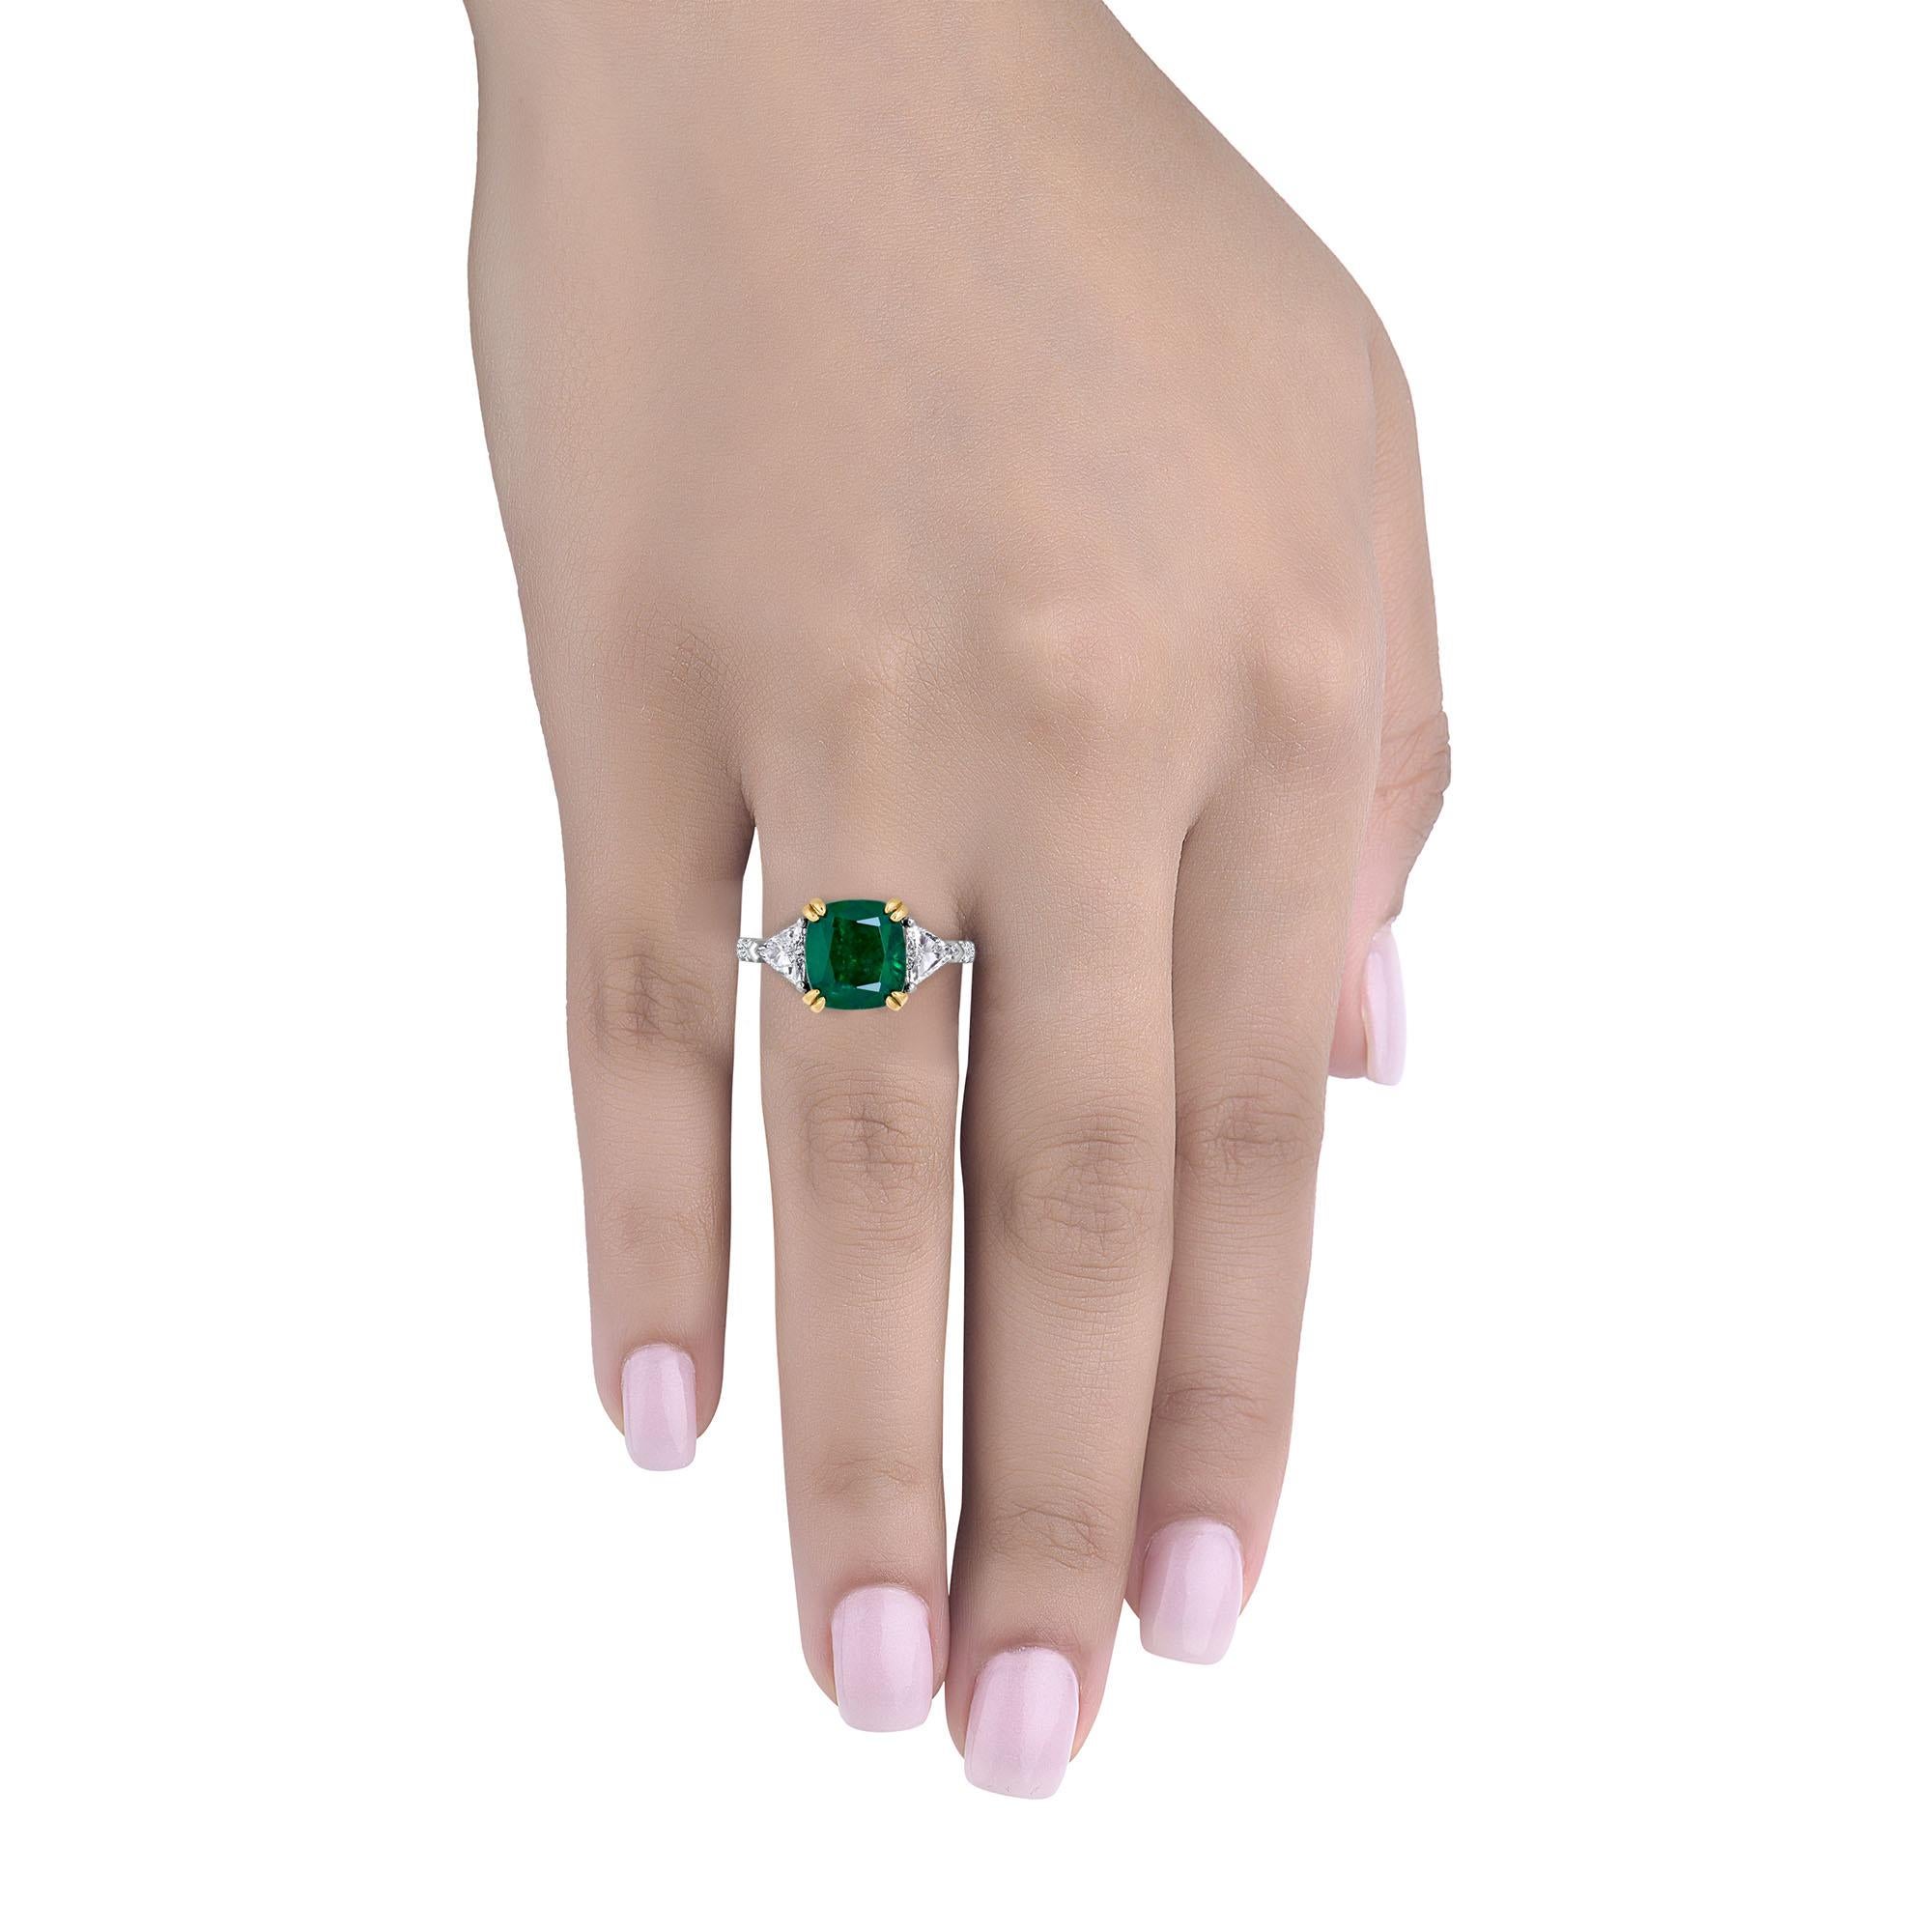 Hand made in the Emilio Jewelry Factory, A gorgeous deep green Cushion Zambian Emerald 3.55 Carats set in the center. The emerald is very clean and completely eye clean. 
Center Emerald Dimensions: 9.24x8.44 
The diamonds total ..69ct and are E-F